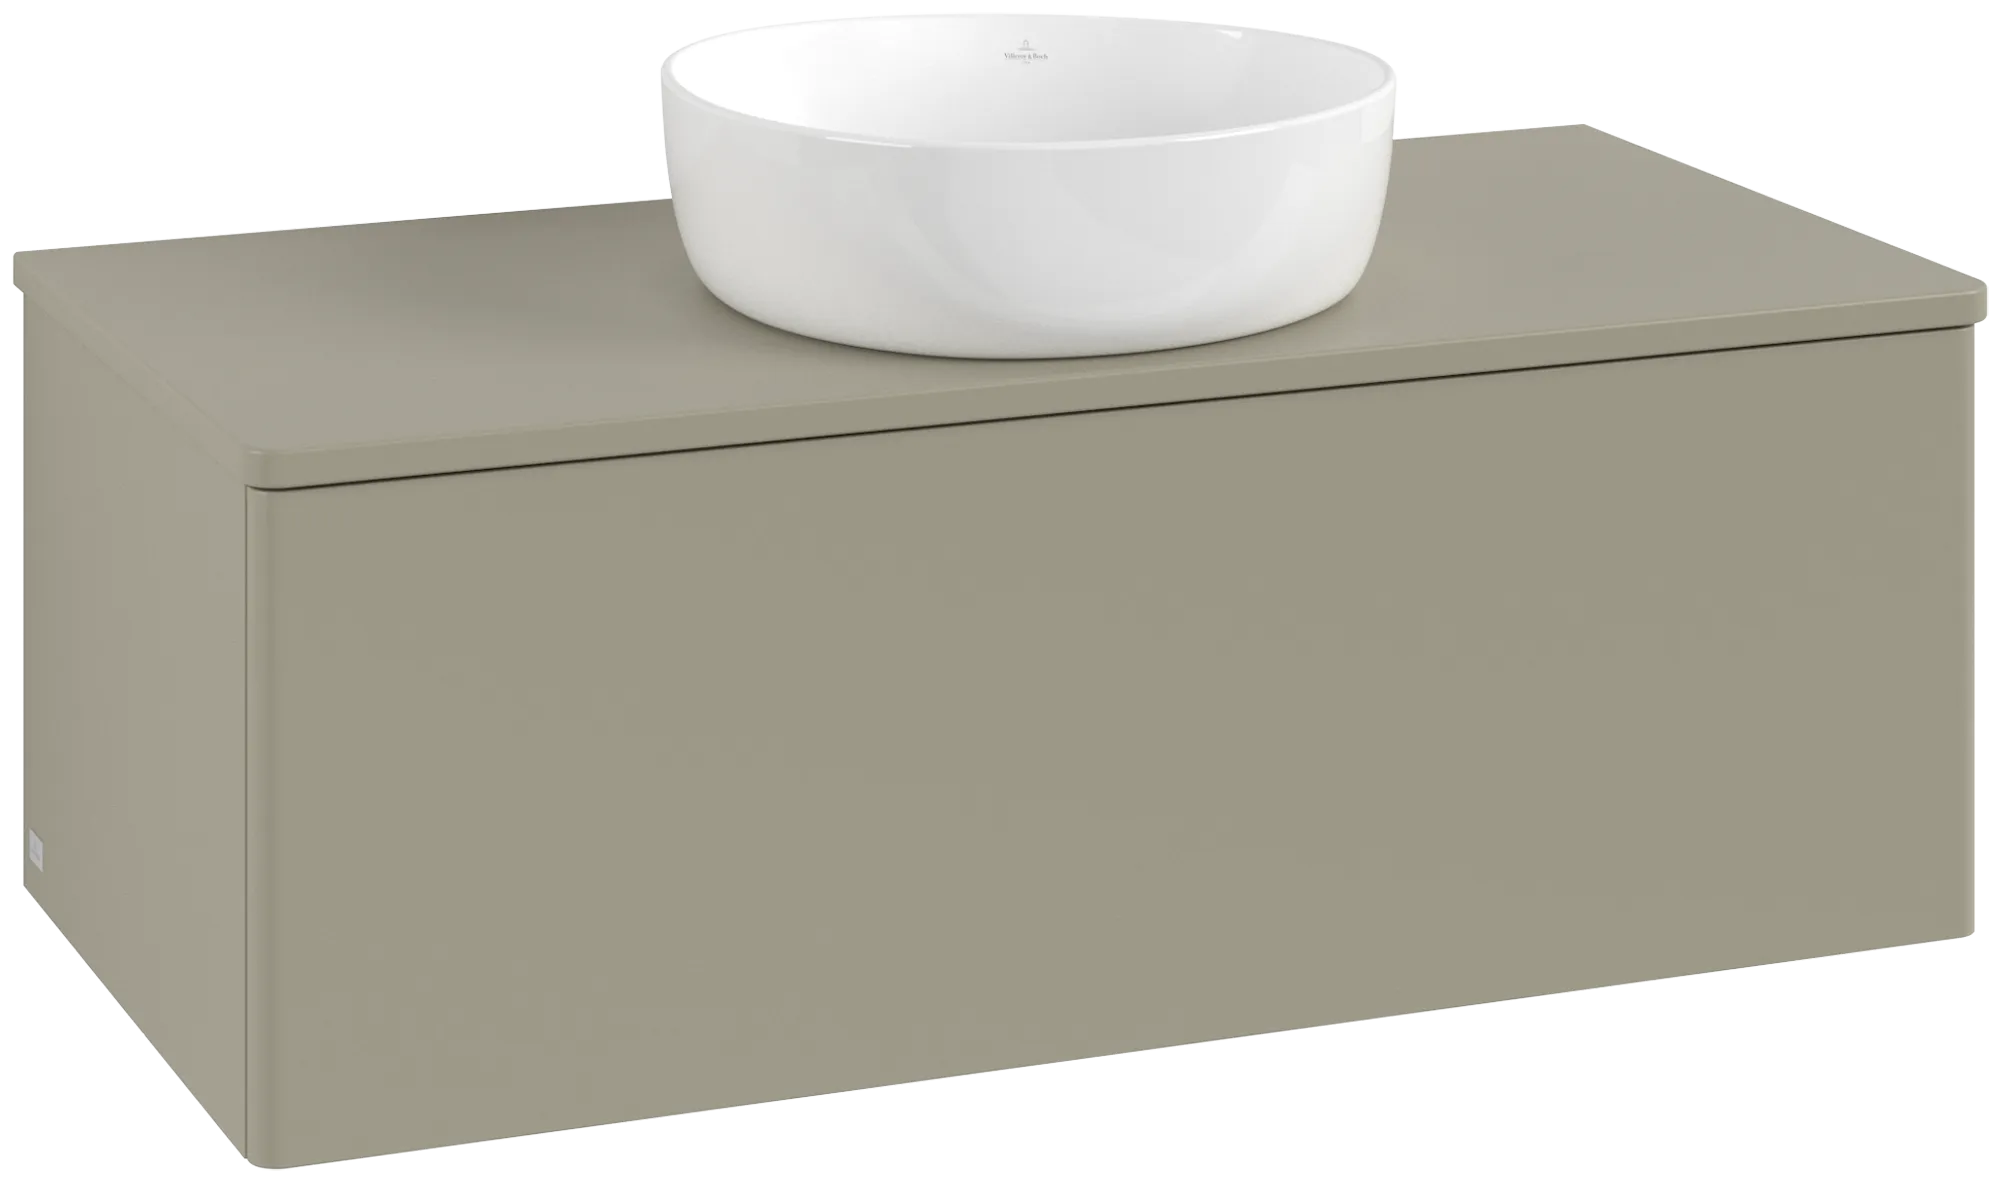 Obrázek VILLEROY BOCH Antao Vanity unit, 1 pull-out compartment, 1000 x 360 x 500 mm, Front without structure, Stone Grey Matt Lacquer / Stone Grey Matt Lacquer #K31050HK